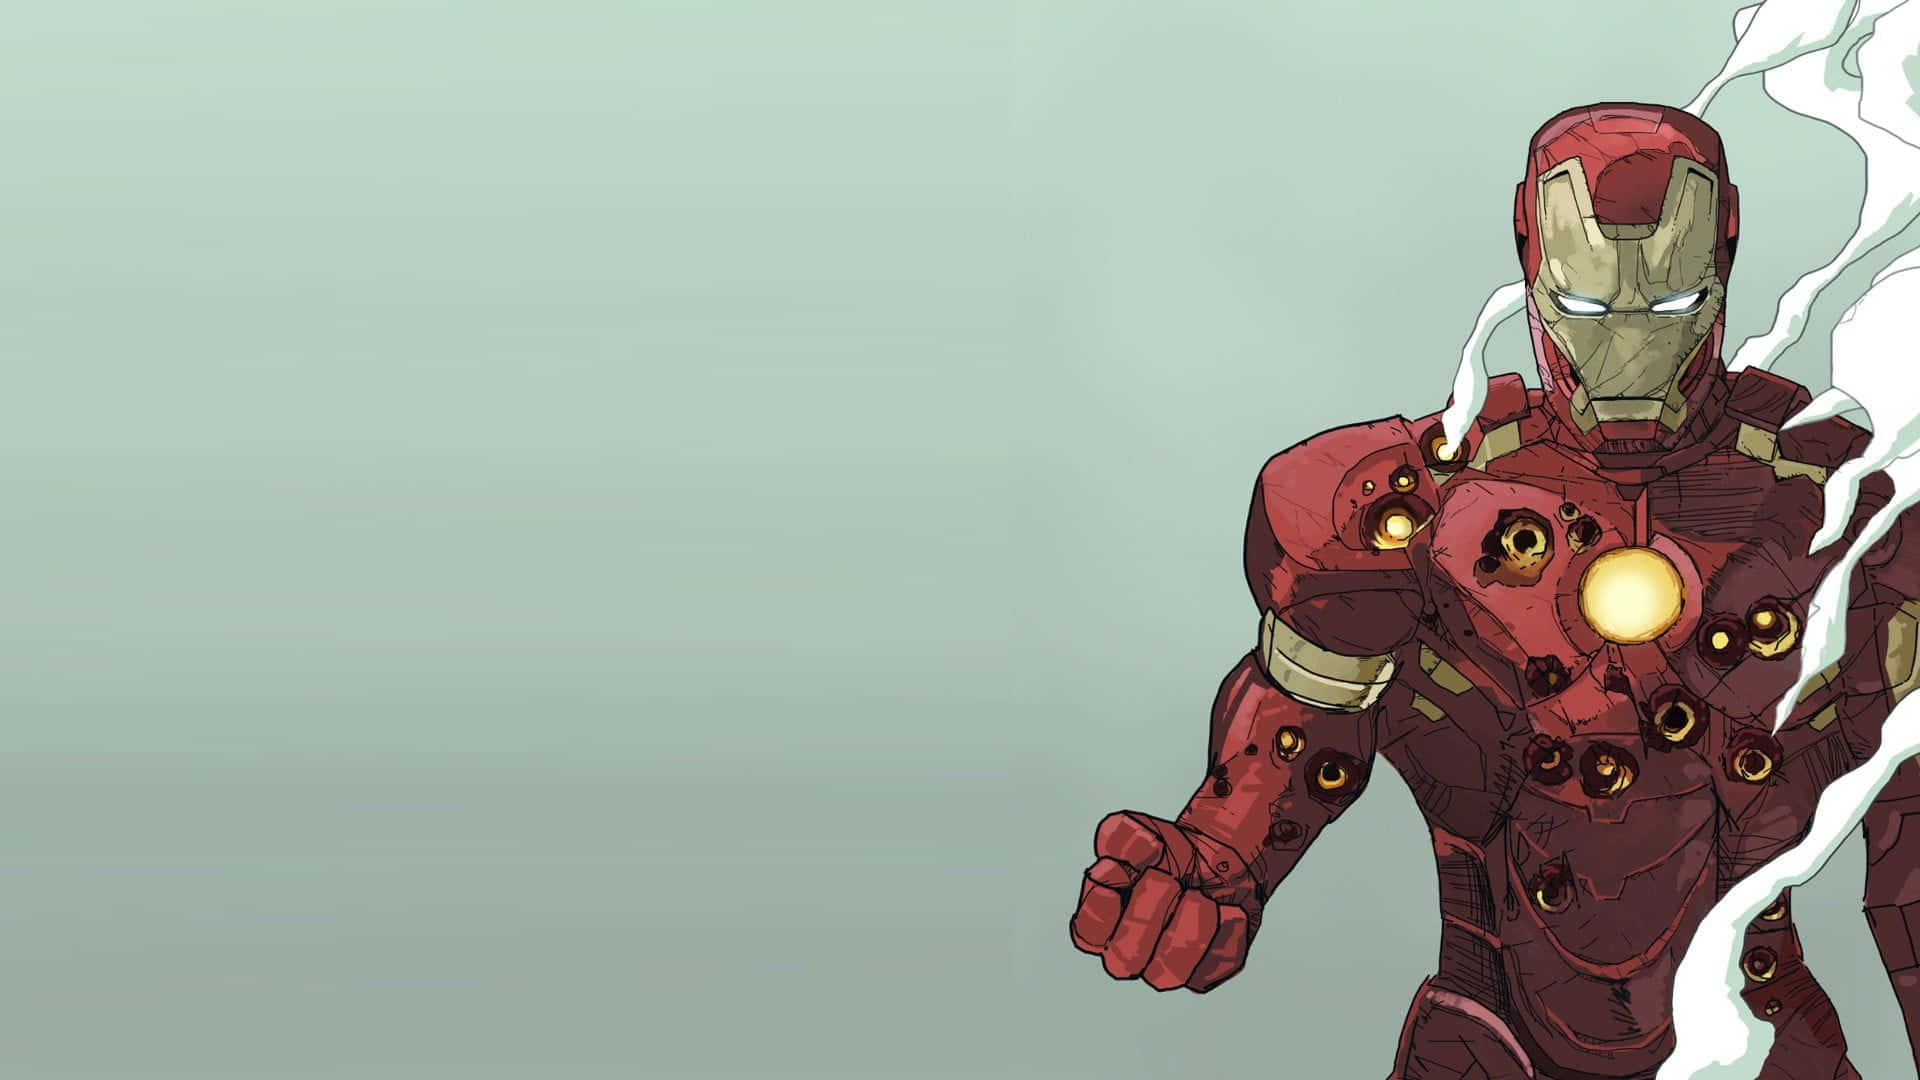 Iron man the future wallpaper 1920x1080 for android 40 - Marvel, Avengers